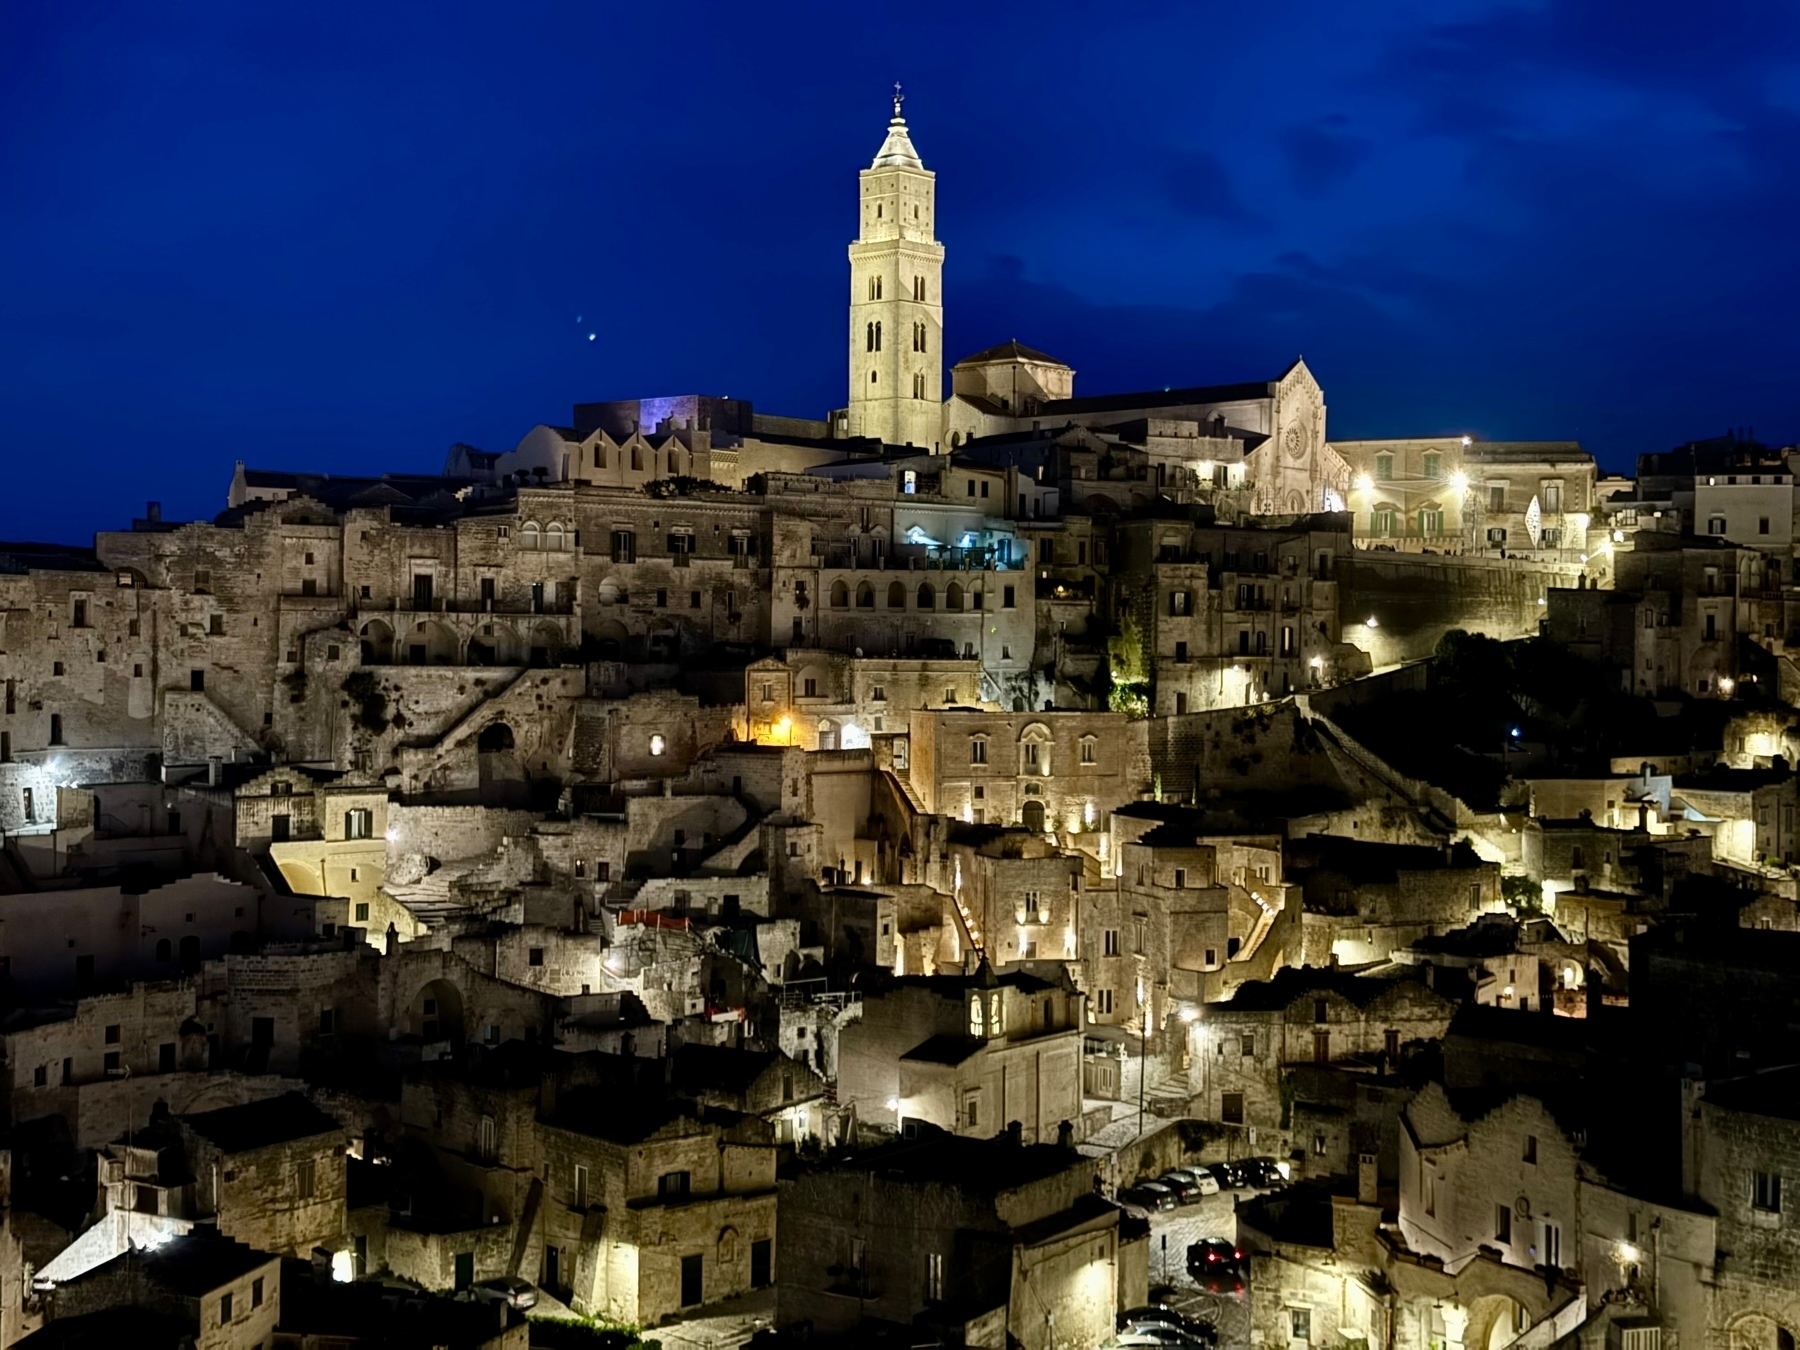 View of Matera, Italy at night with the illuminated historic Sassi (stone houses) and the Cathedral of Matera prominently visible against a dark blue sky.